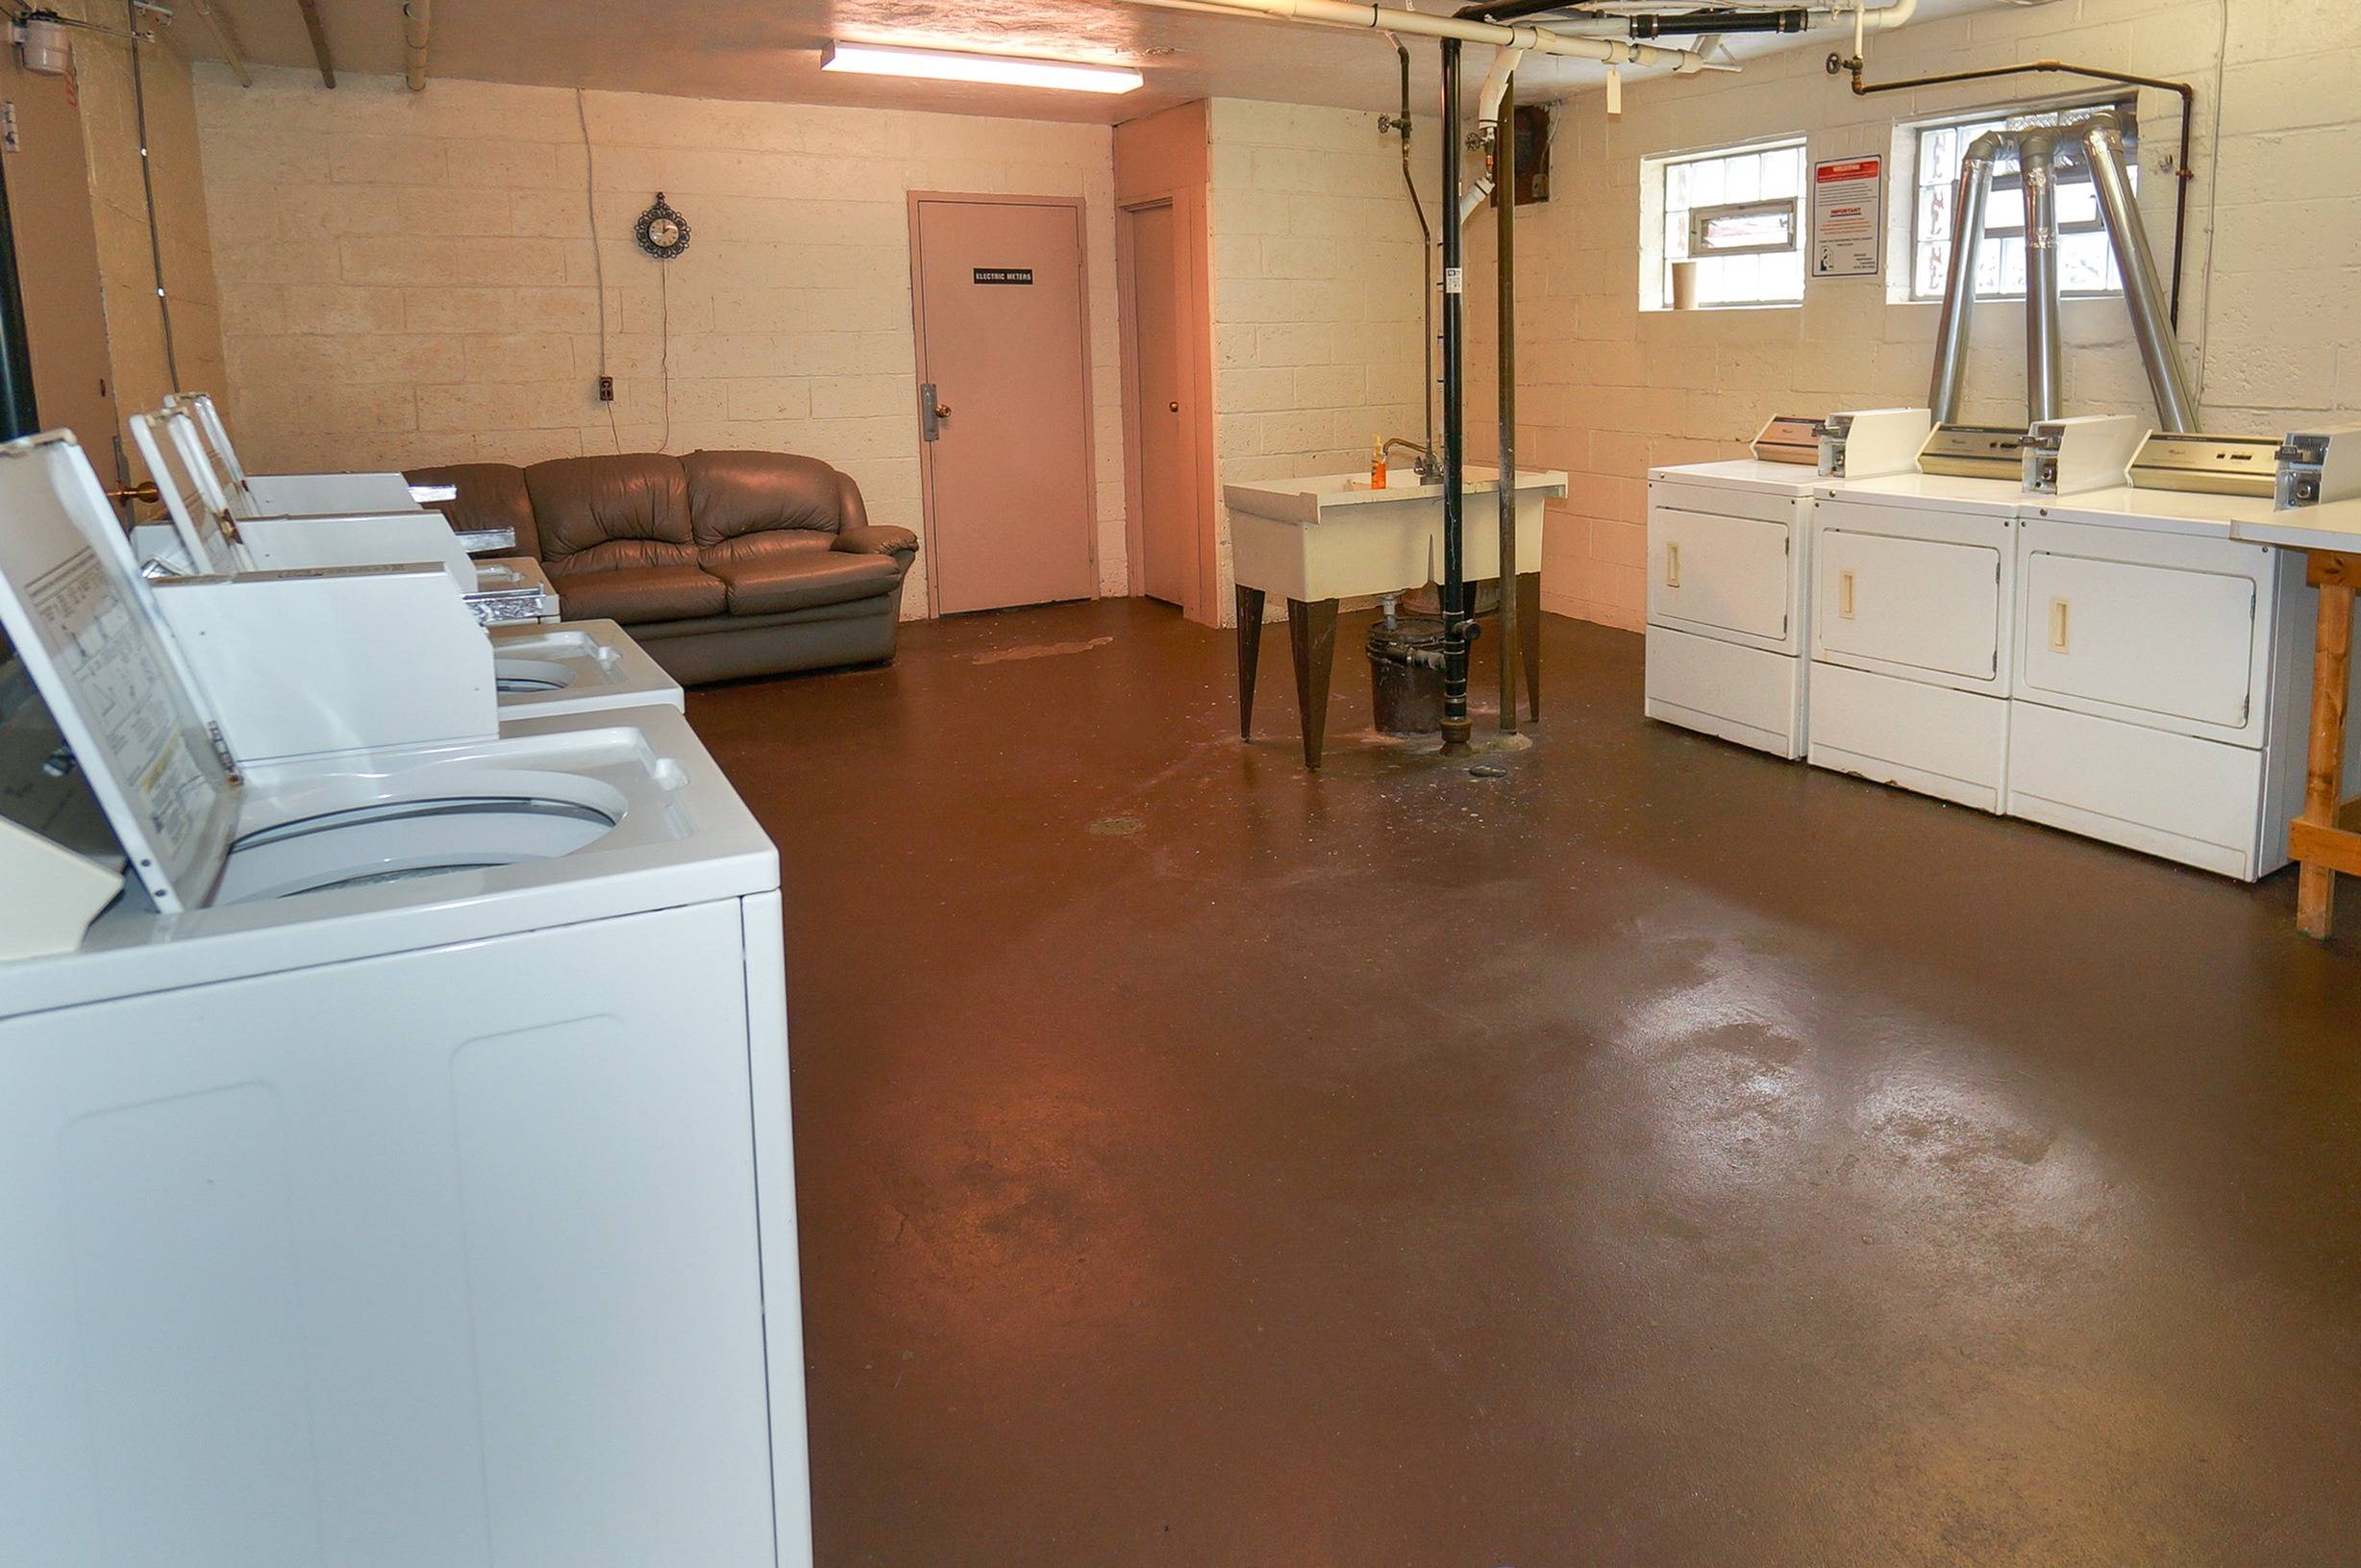 Laundry facilities at the Ravenswood Building